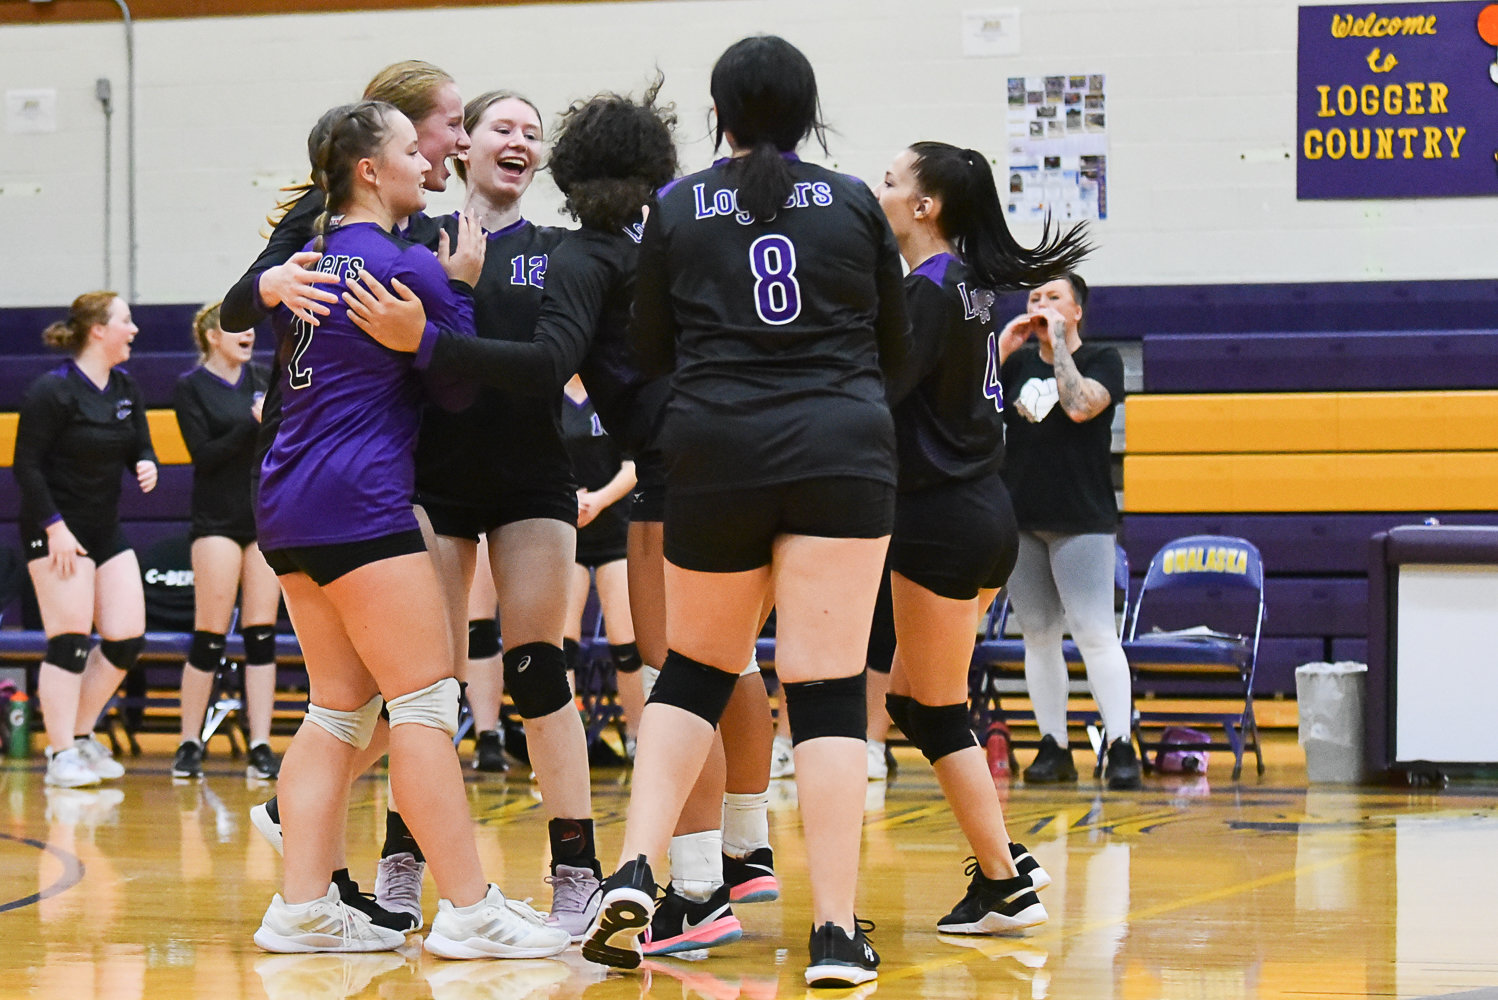 Onalaska celebrates its set-winning point in the first set of the Loggers' match against Toledo on Oct. 26.